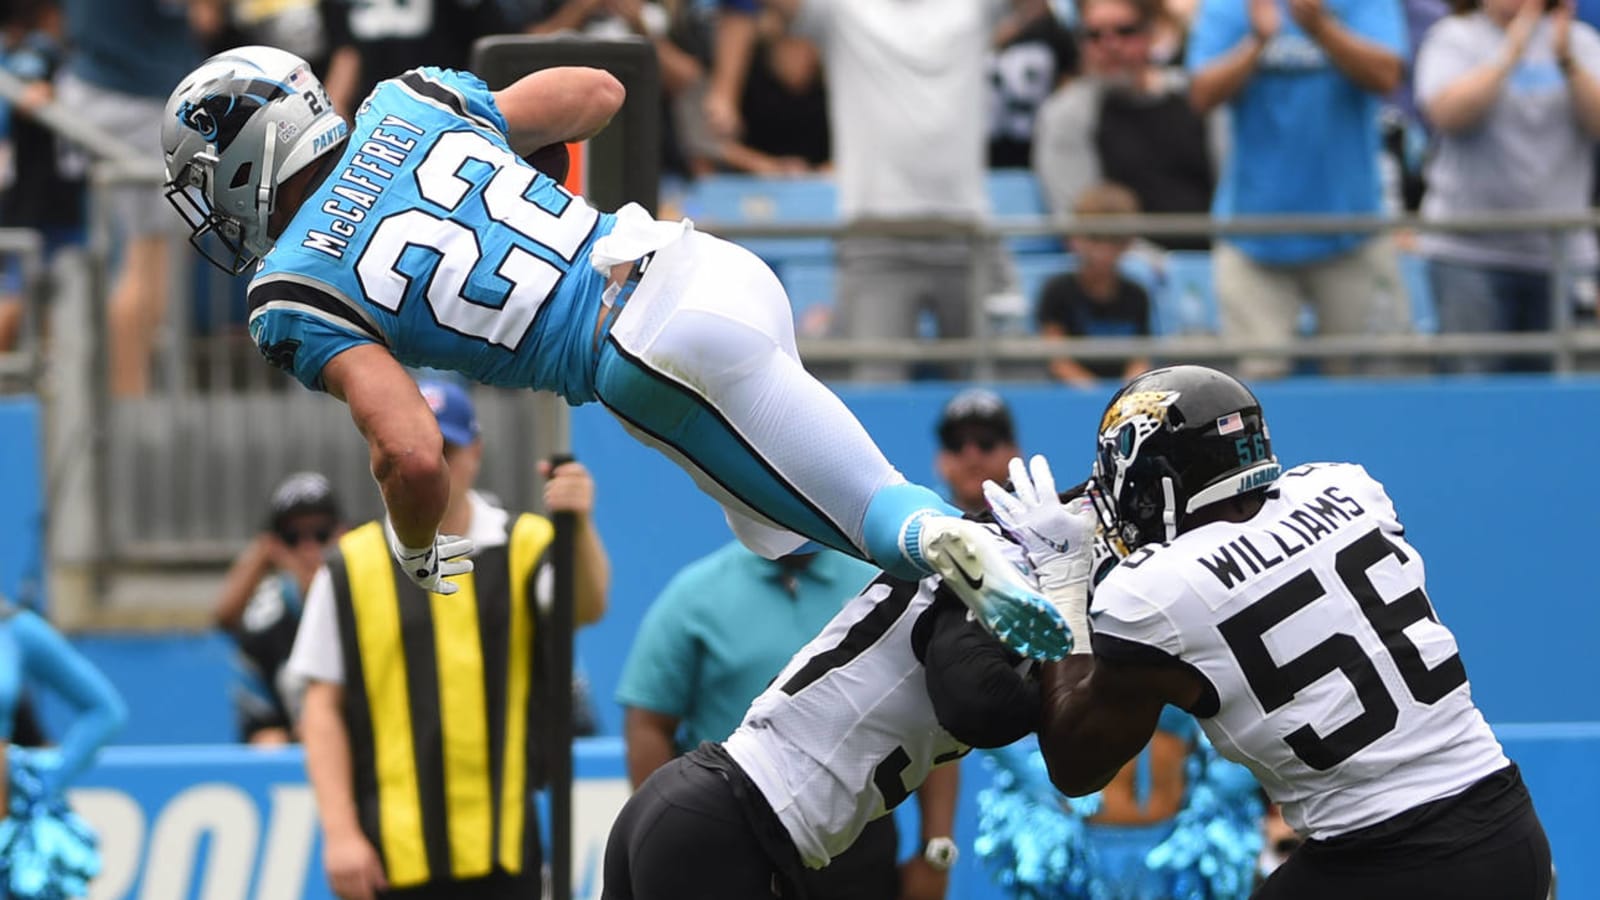 Watch: Christian McCaffrey takes flying leap over defender, flips into end zone for TD